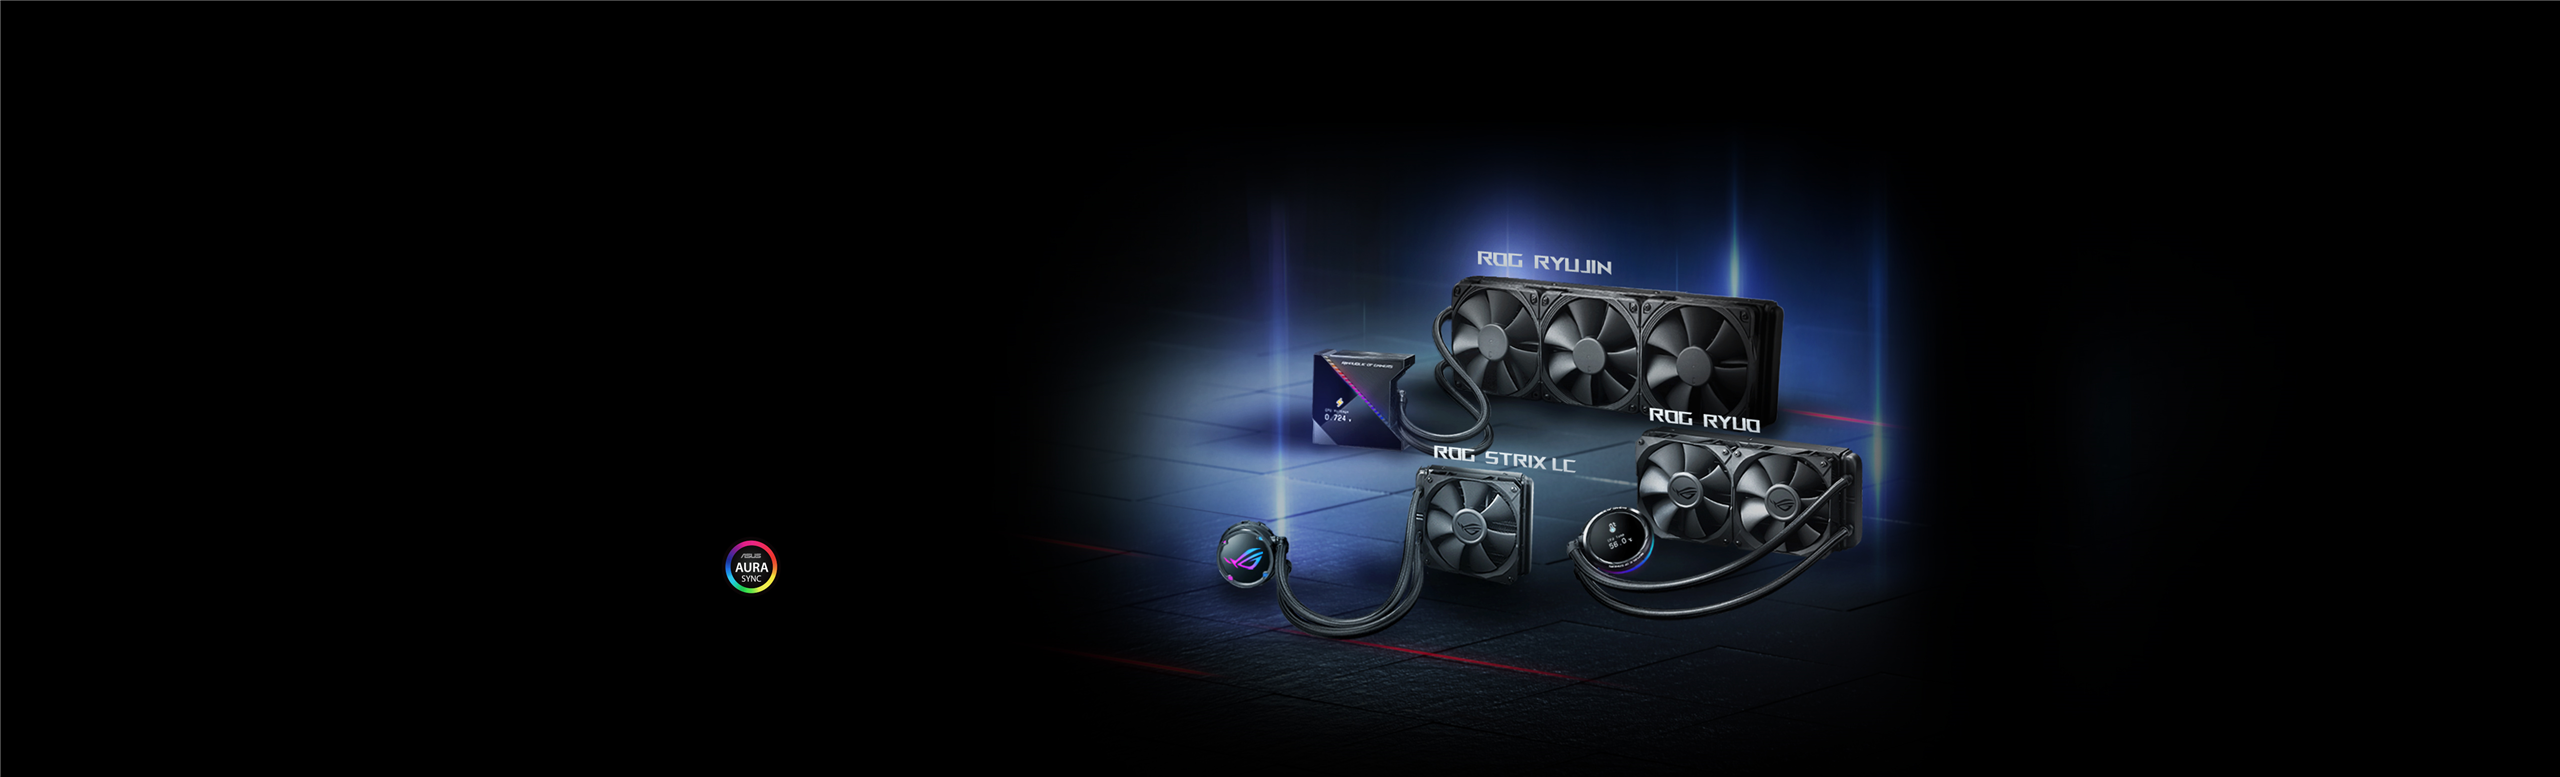 ASUS AIO Coolers